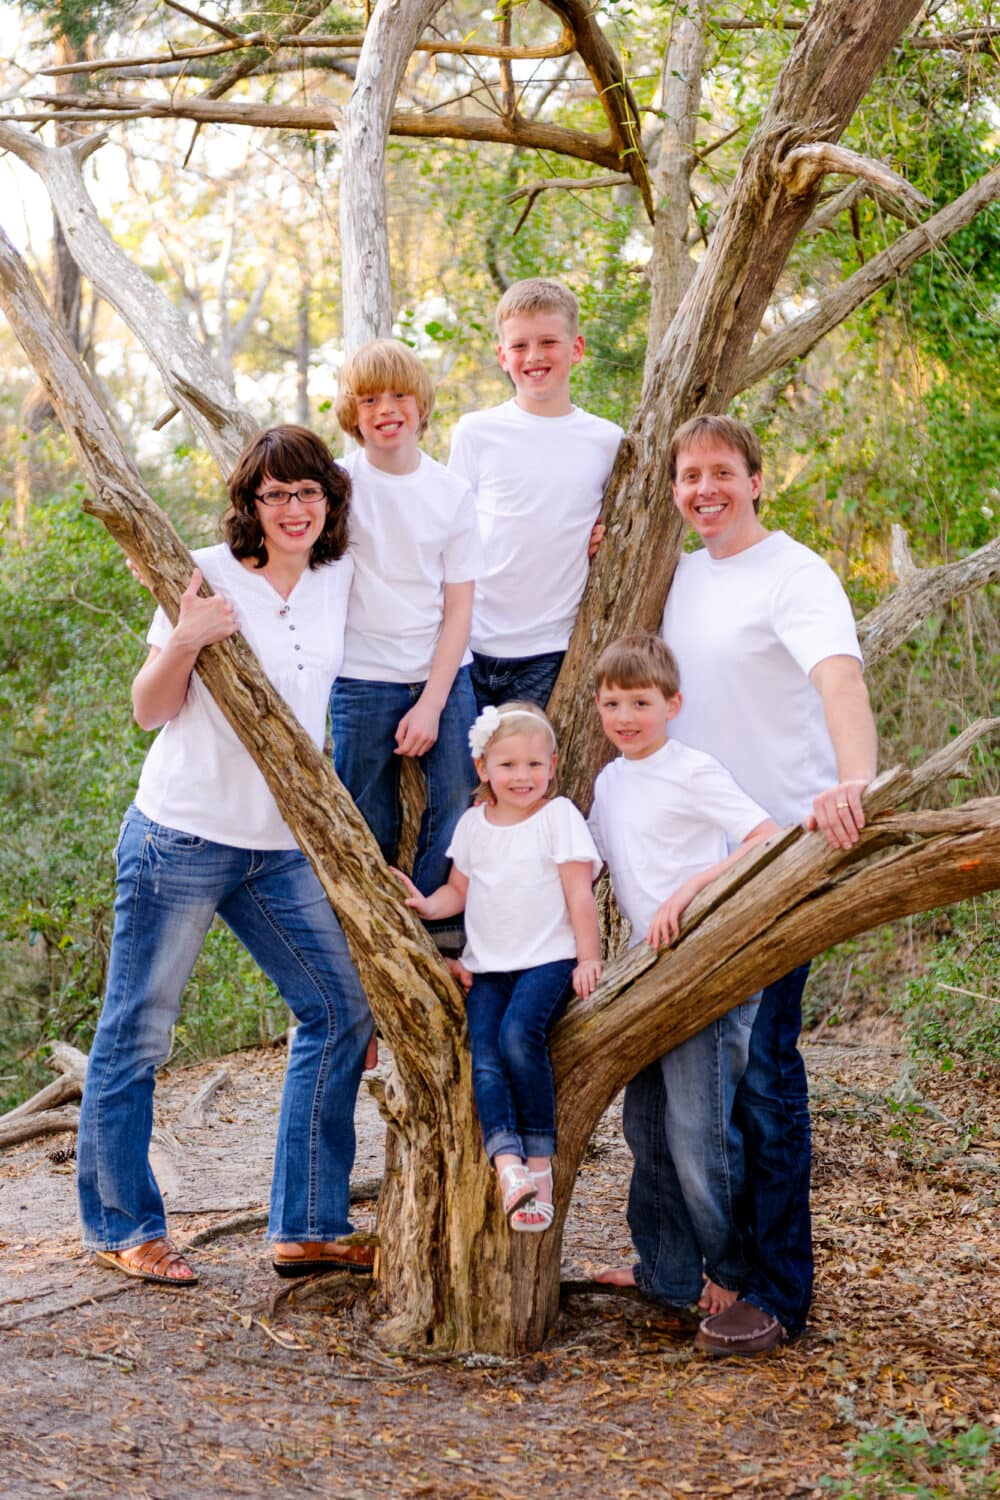 Family of six standing together around the old oak tree - Myrtle Beach State Park